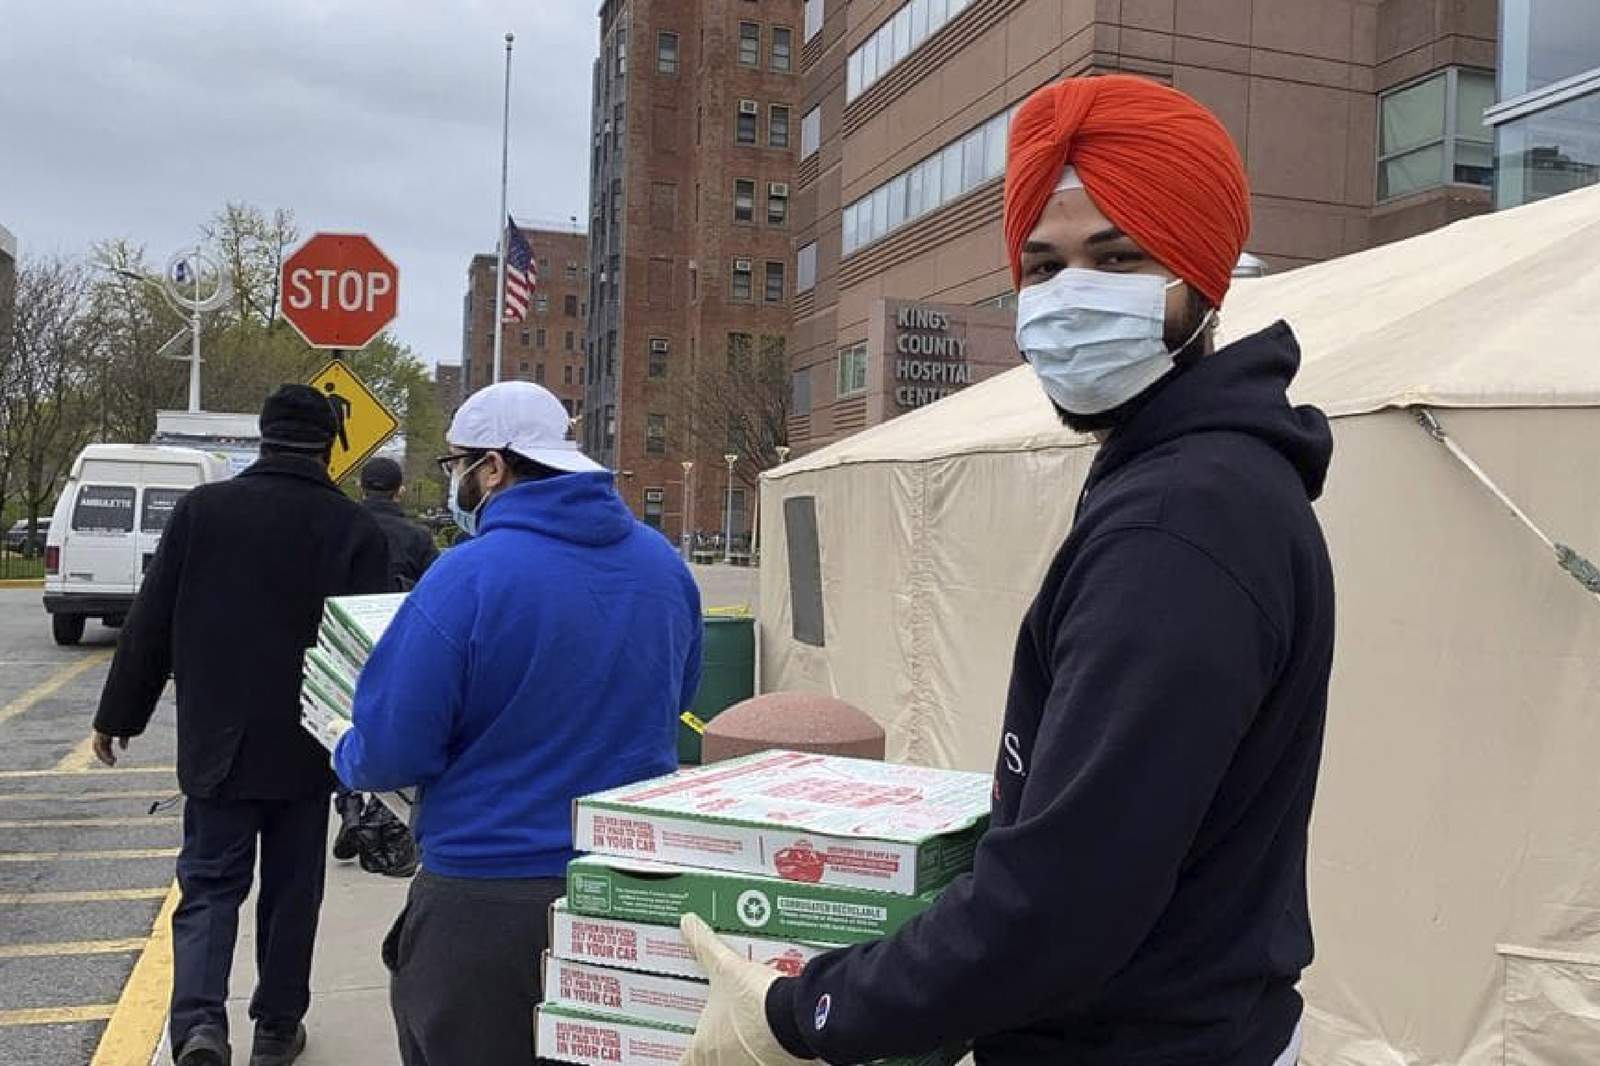 In Detroit, NYC, kindness comes one slice of pizza at a time